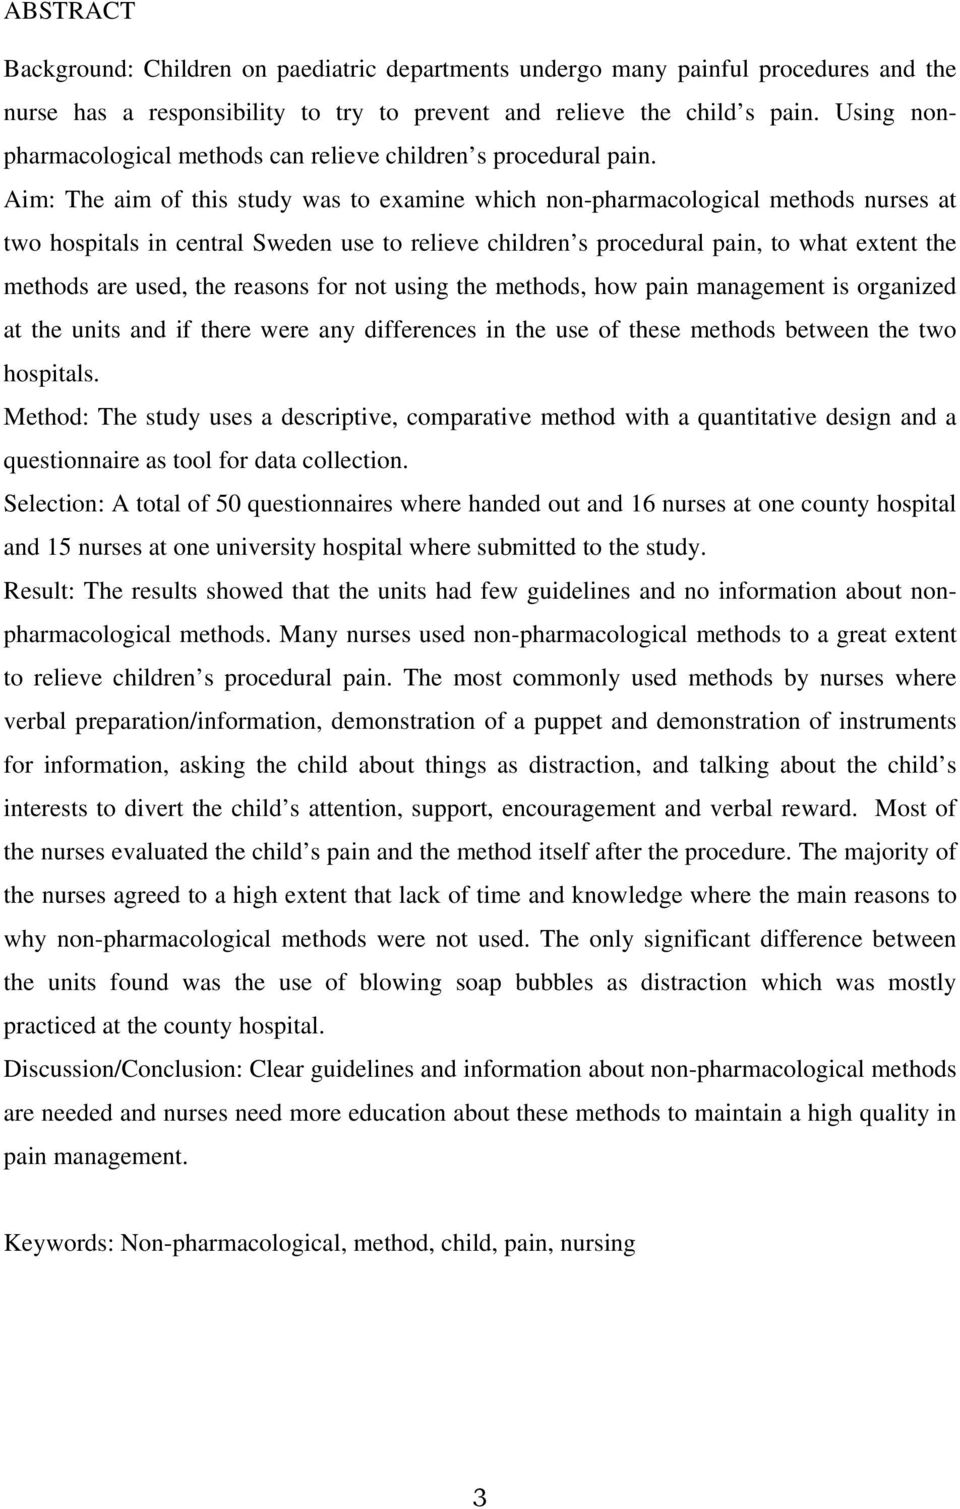 Aim: The aim of this study was to examine which non-pharmacological methods nurses at two hospitals in central Sweden use to relieve children s procedural pain, to what extent the methods are used,